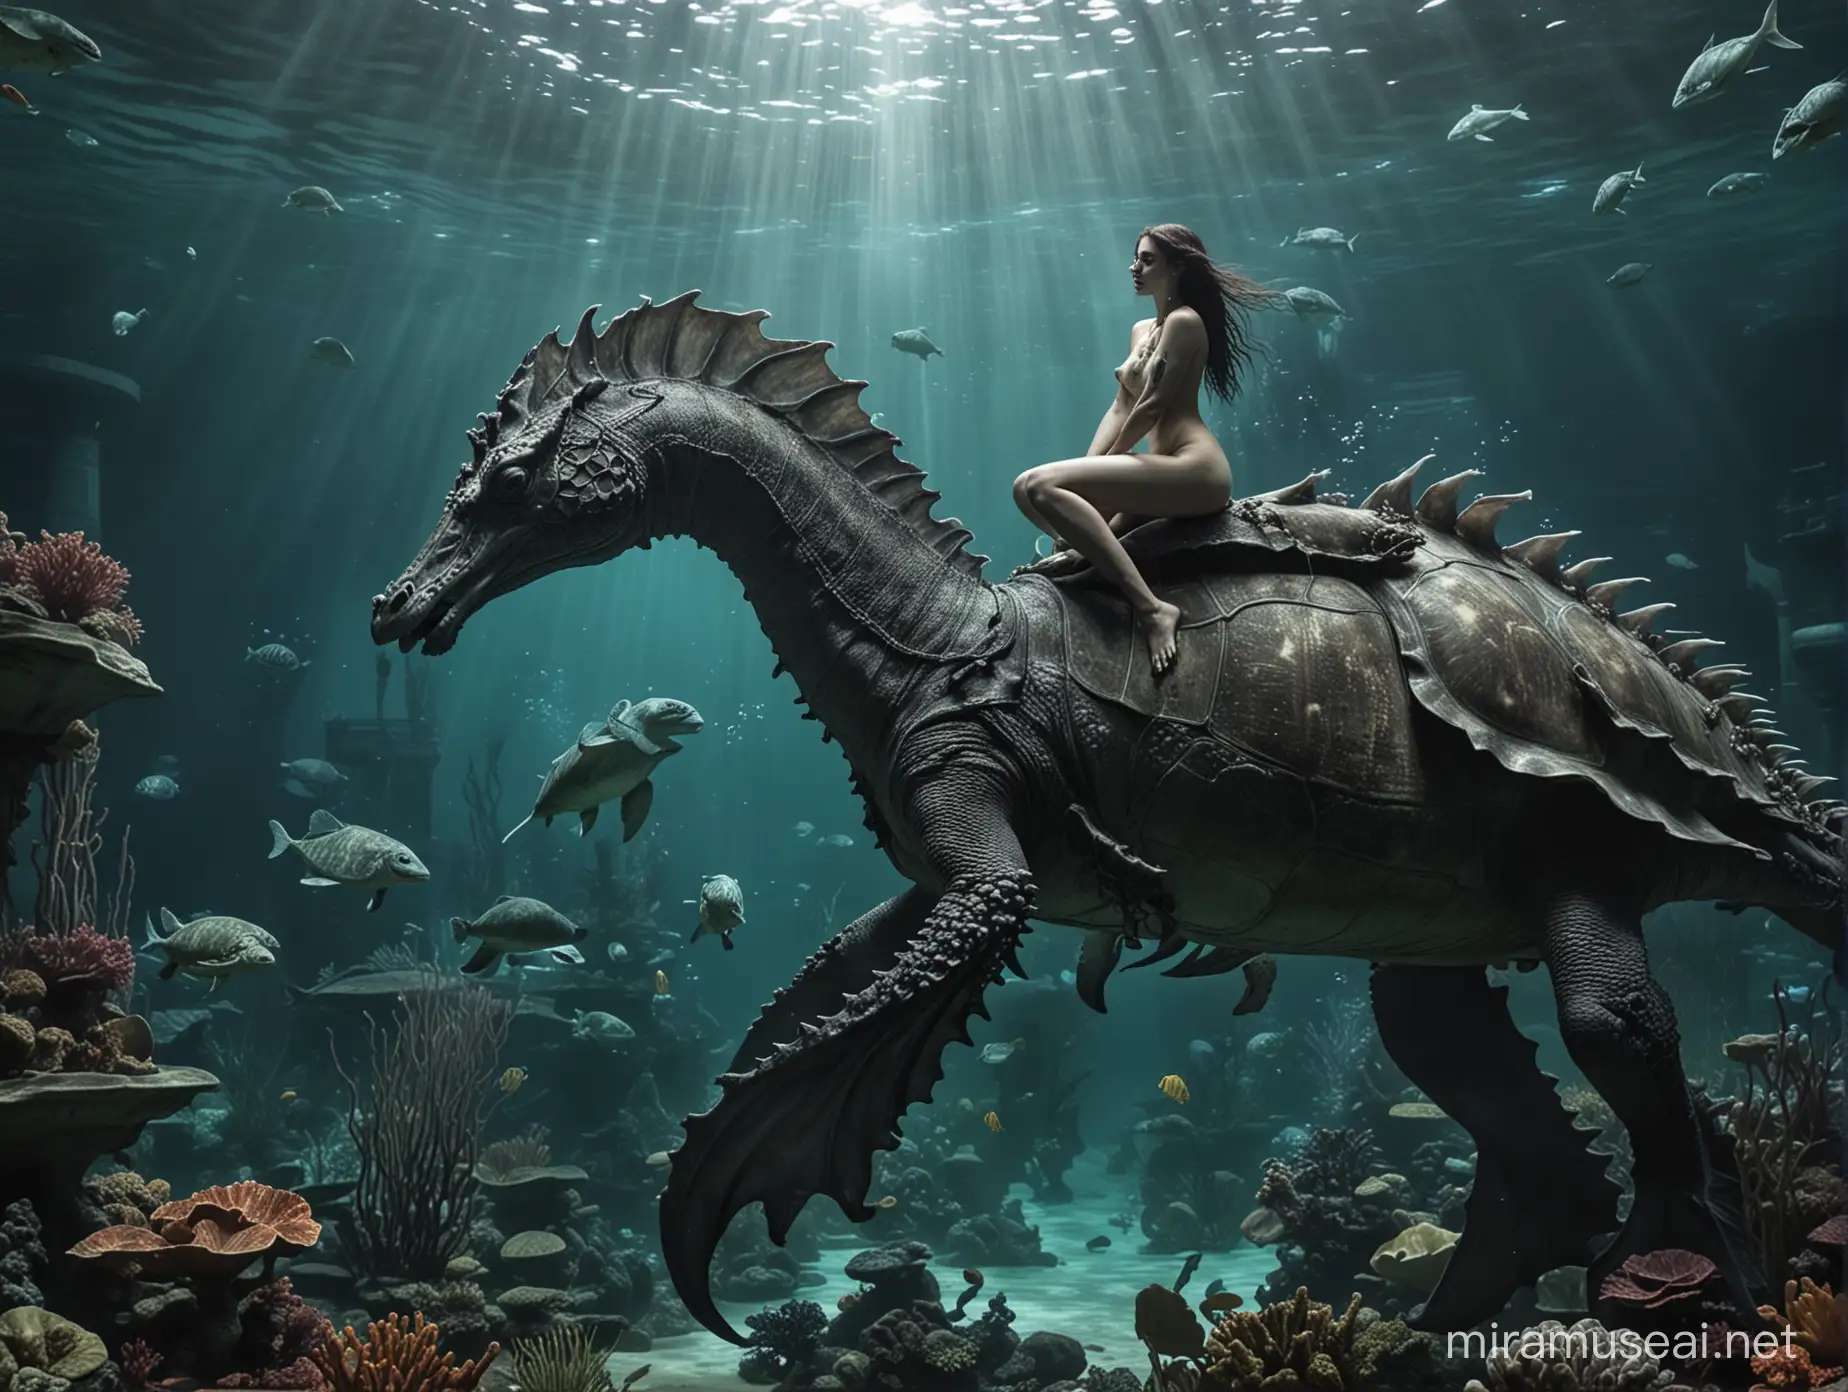 Gothic Woman Riding Seahorse in Oceanic Tank with Sea Turtles